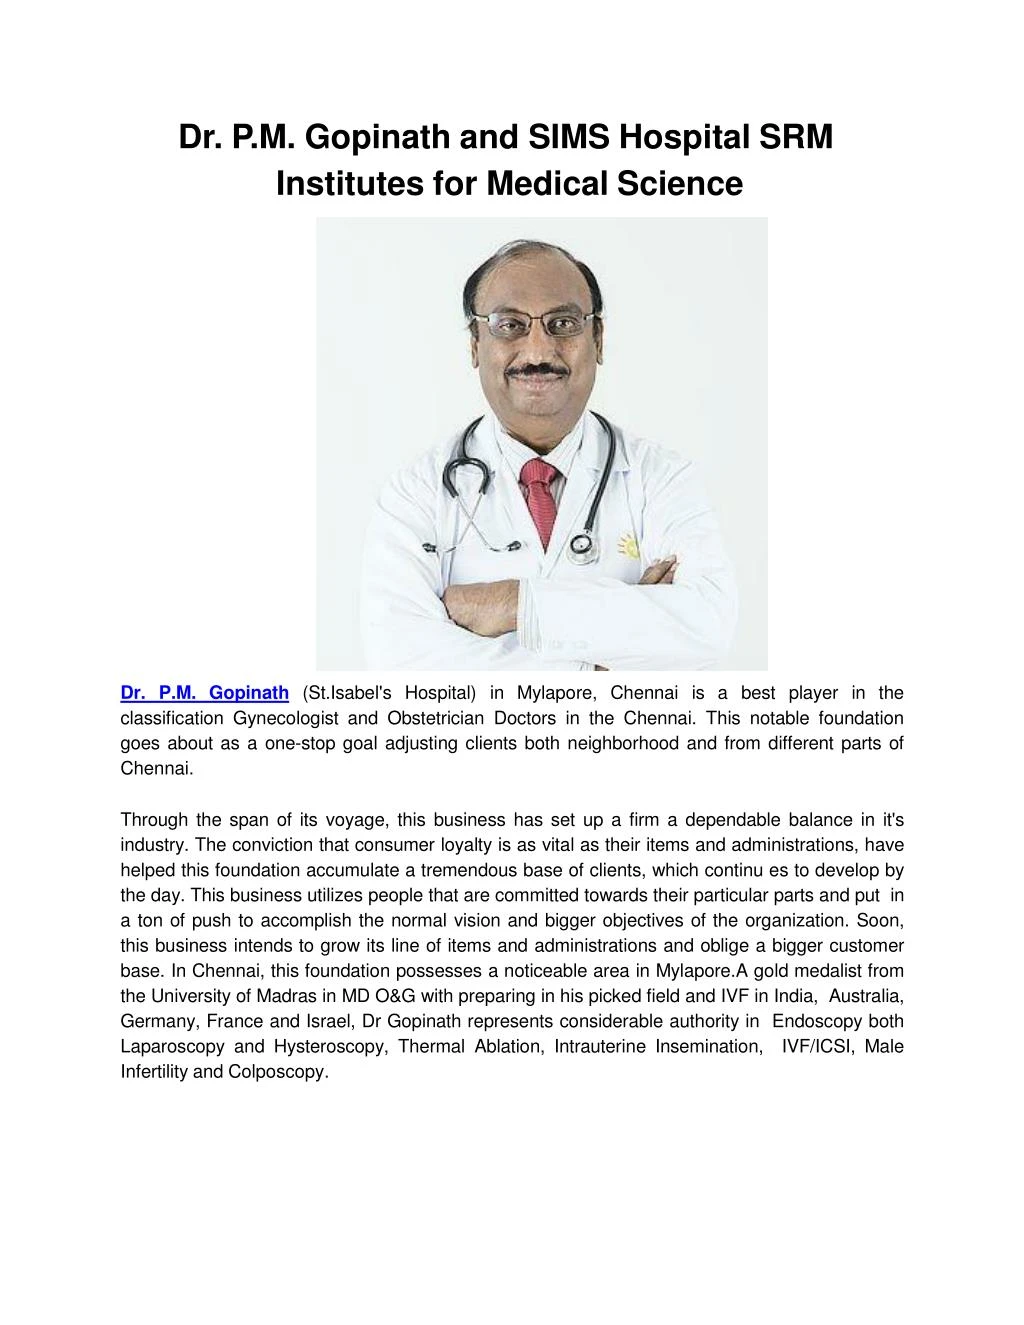 dr p m gopinath and sims hospital srm institutes